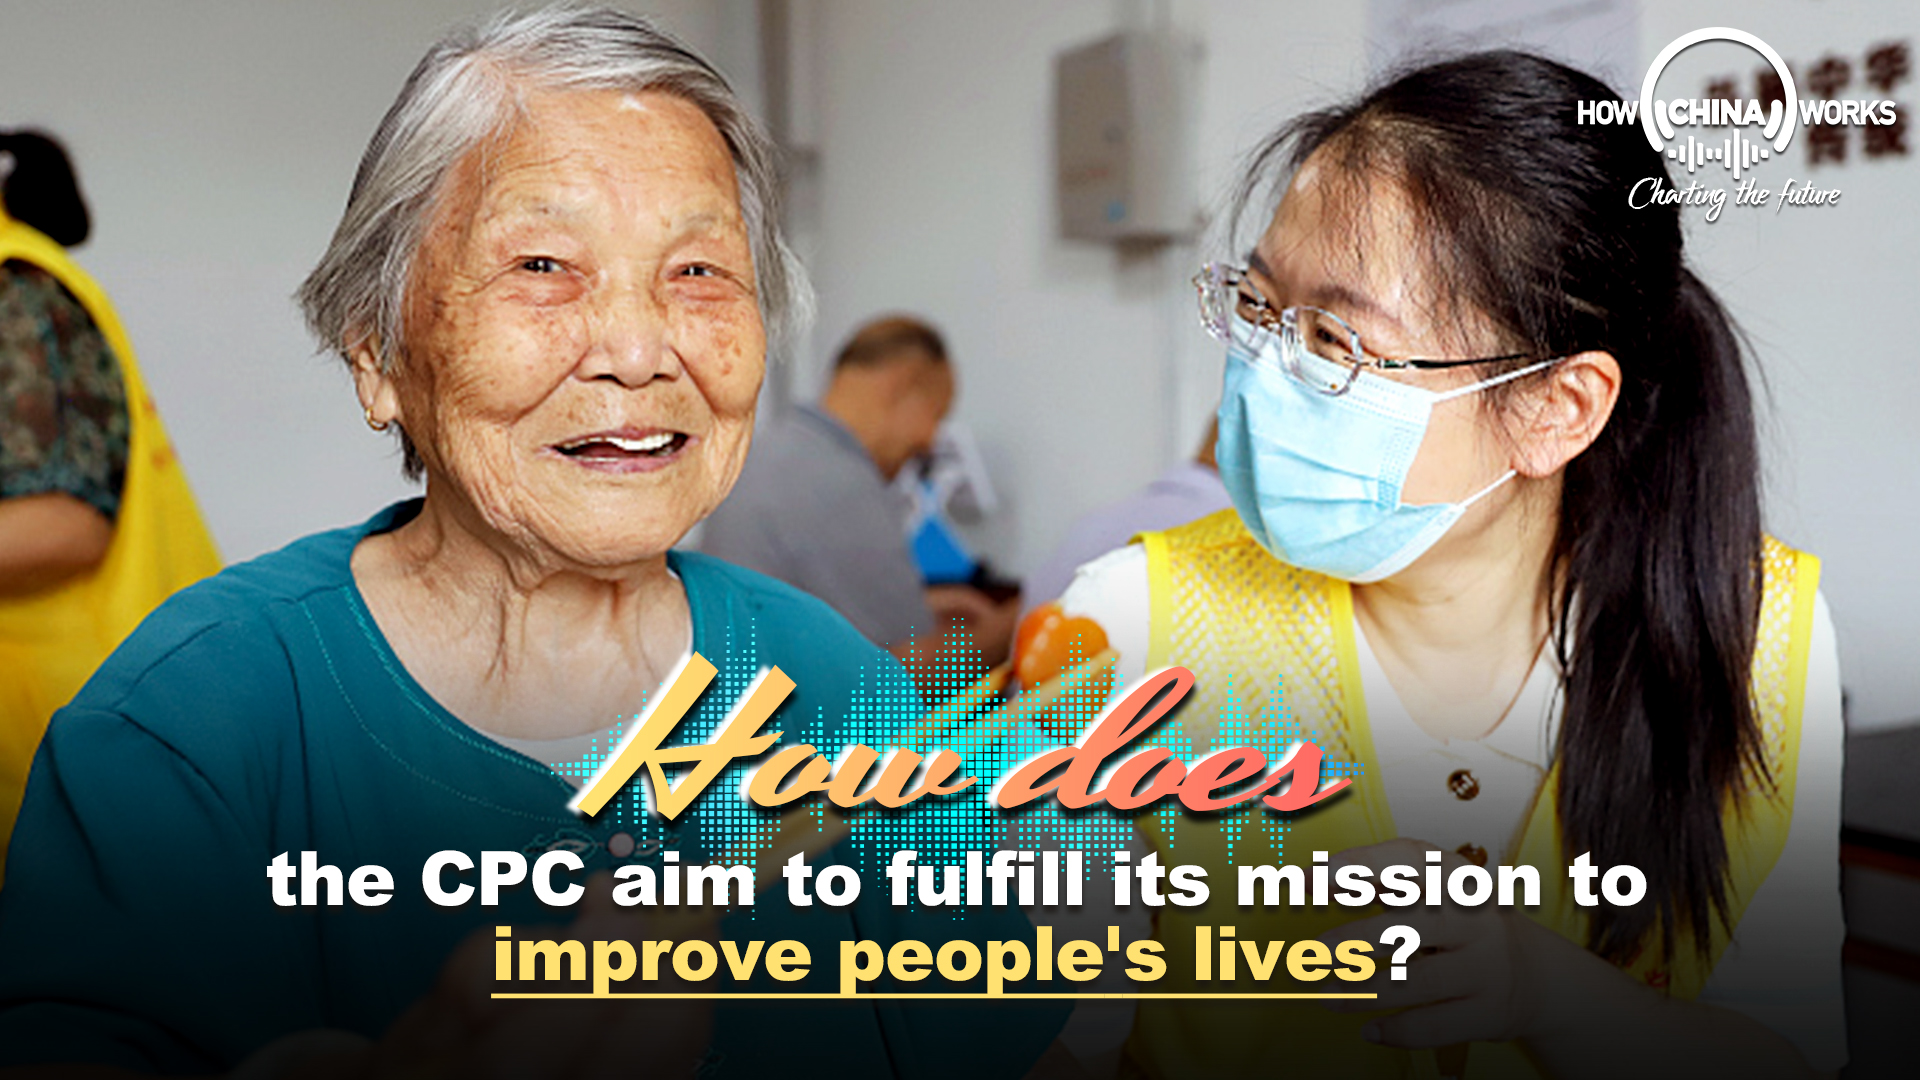 How does the CPC aim to fulfill its mission to improve people's lives?